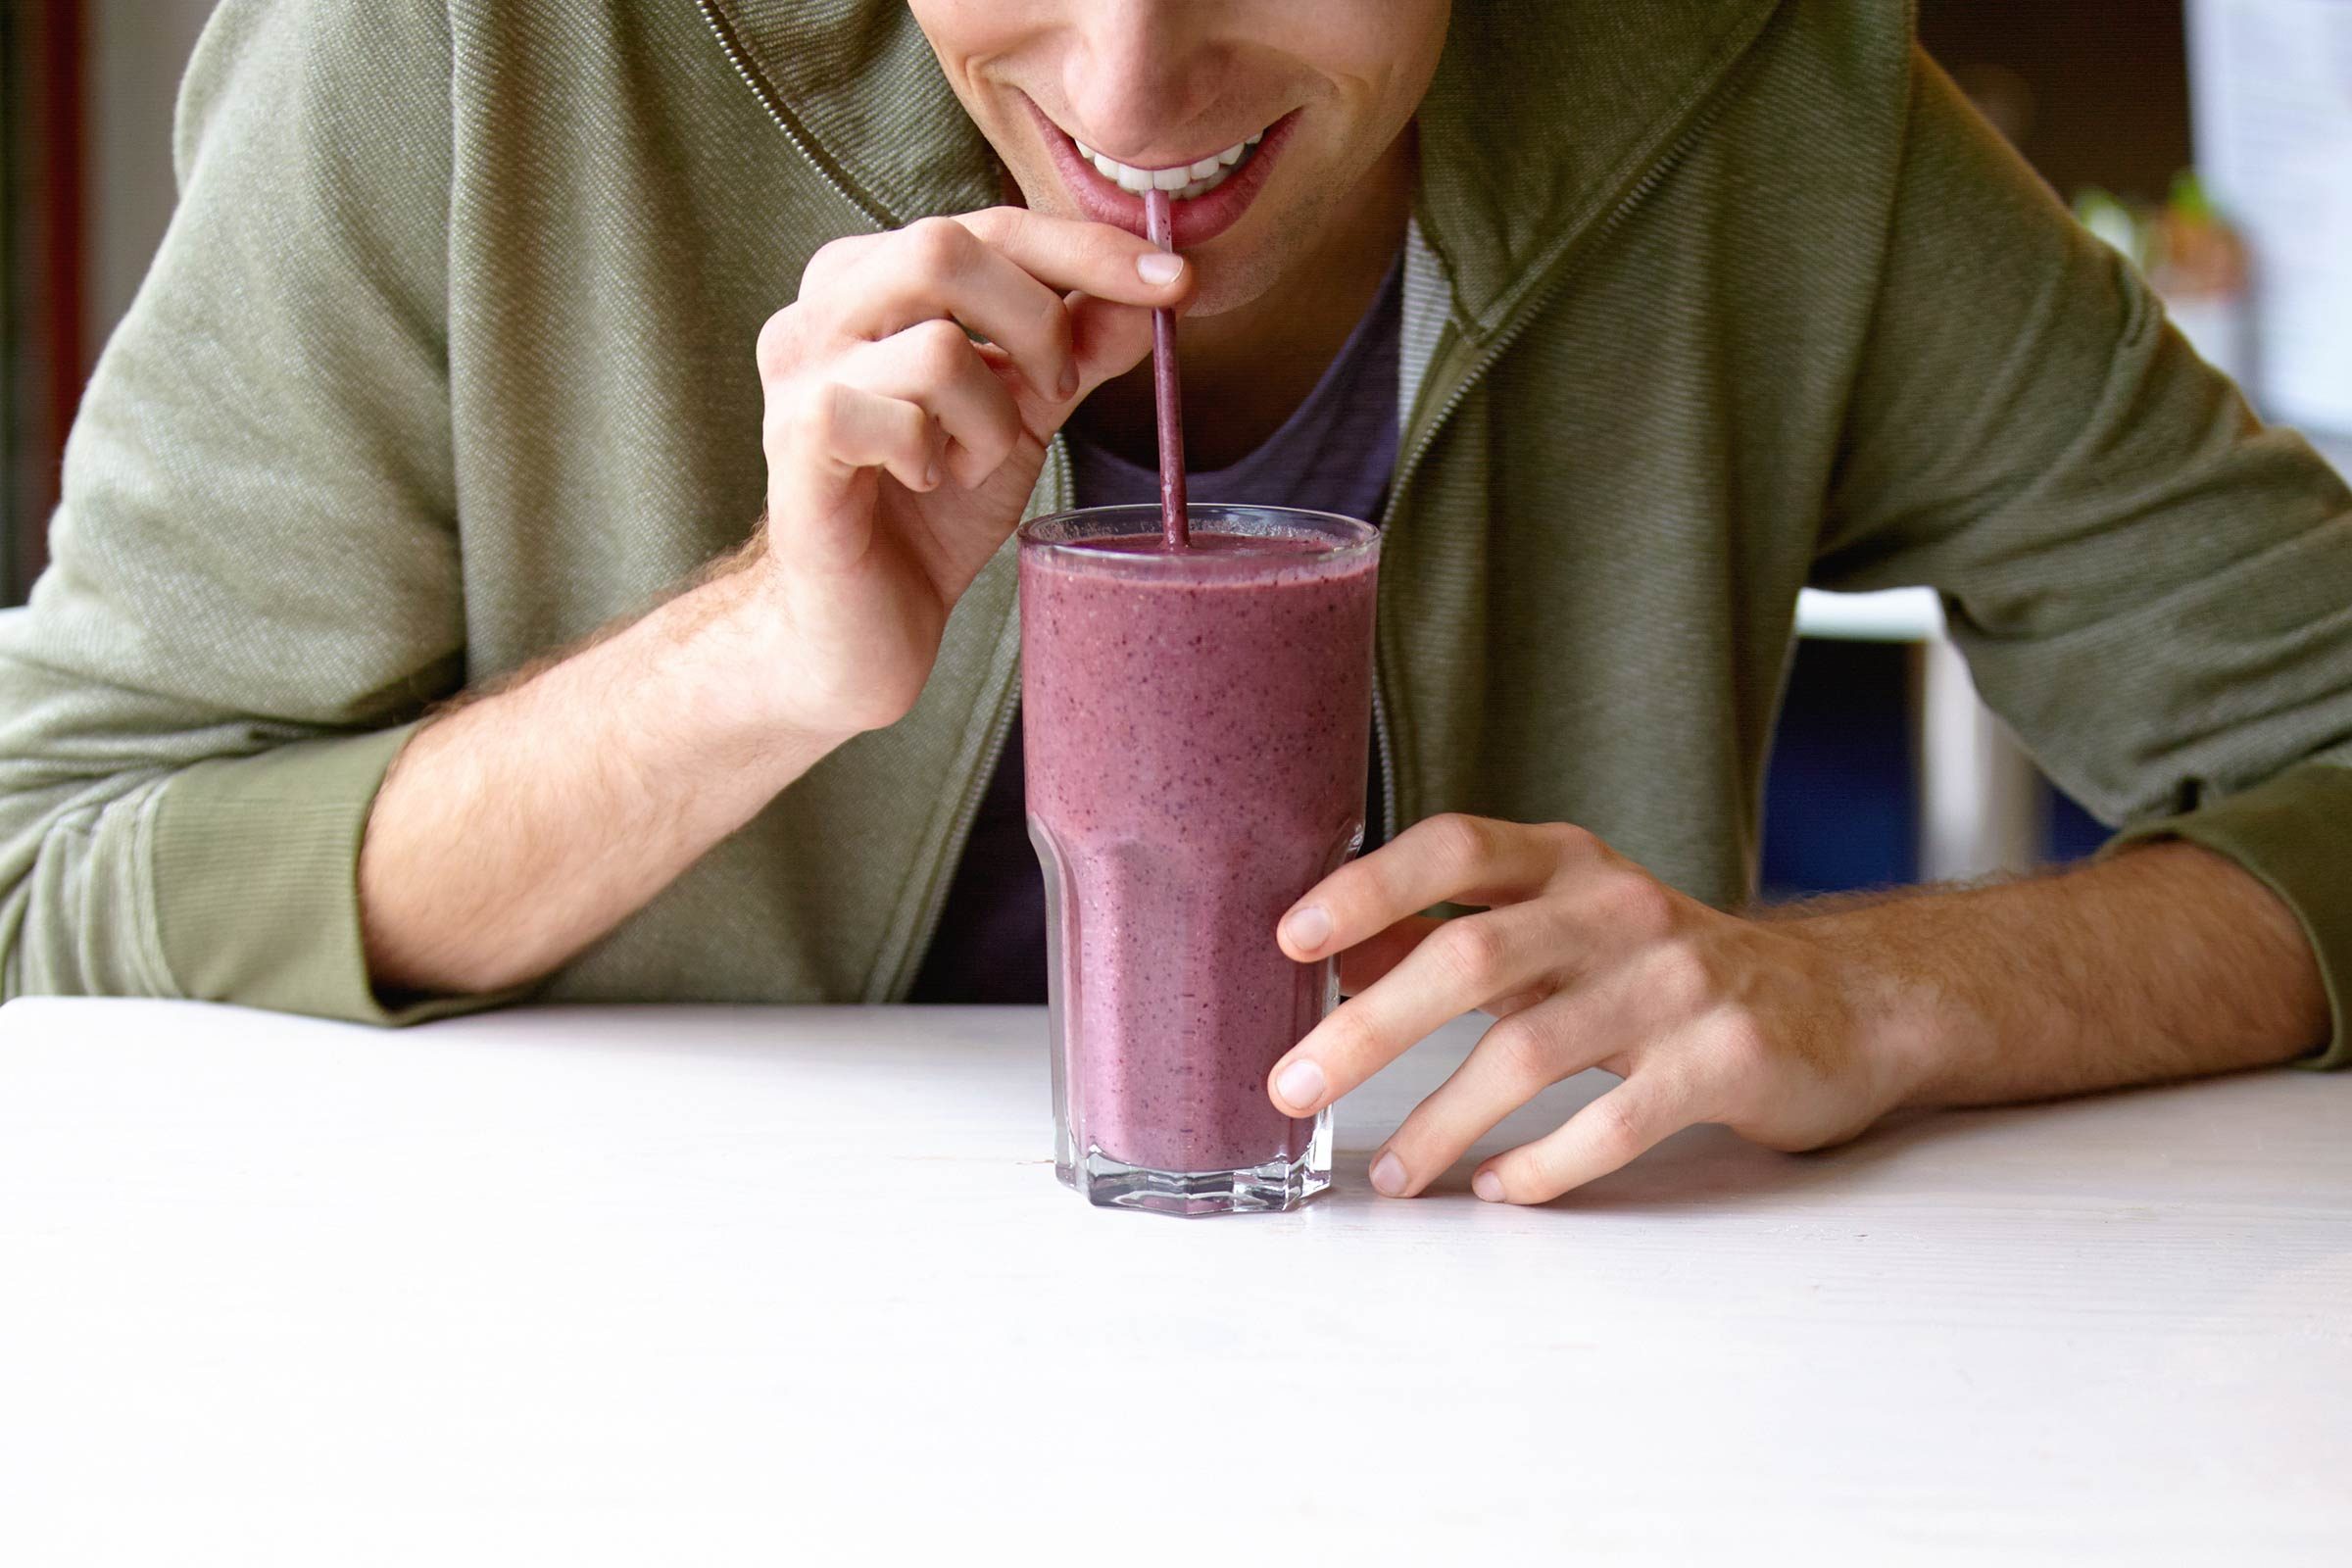 You overload your smoothie